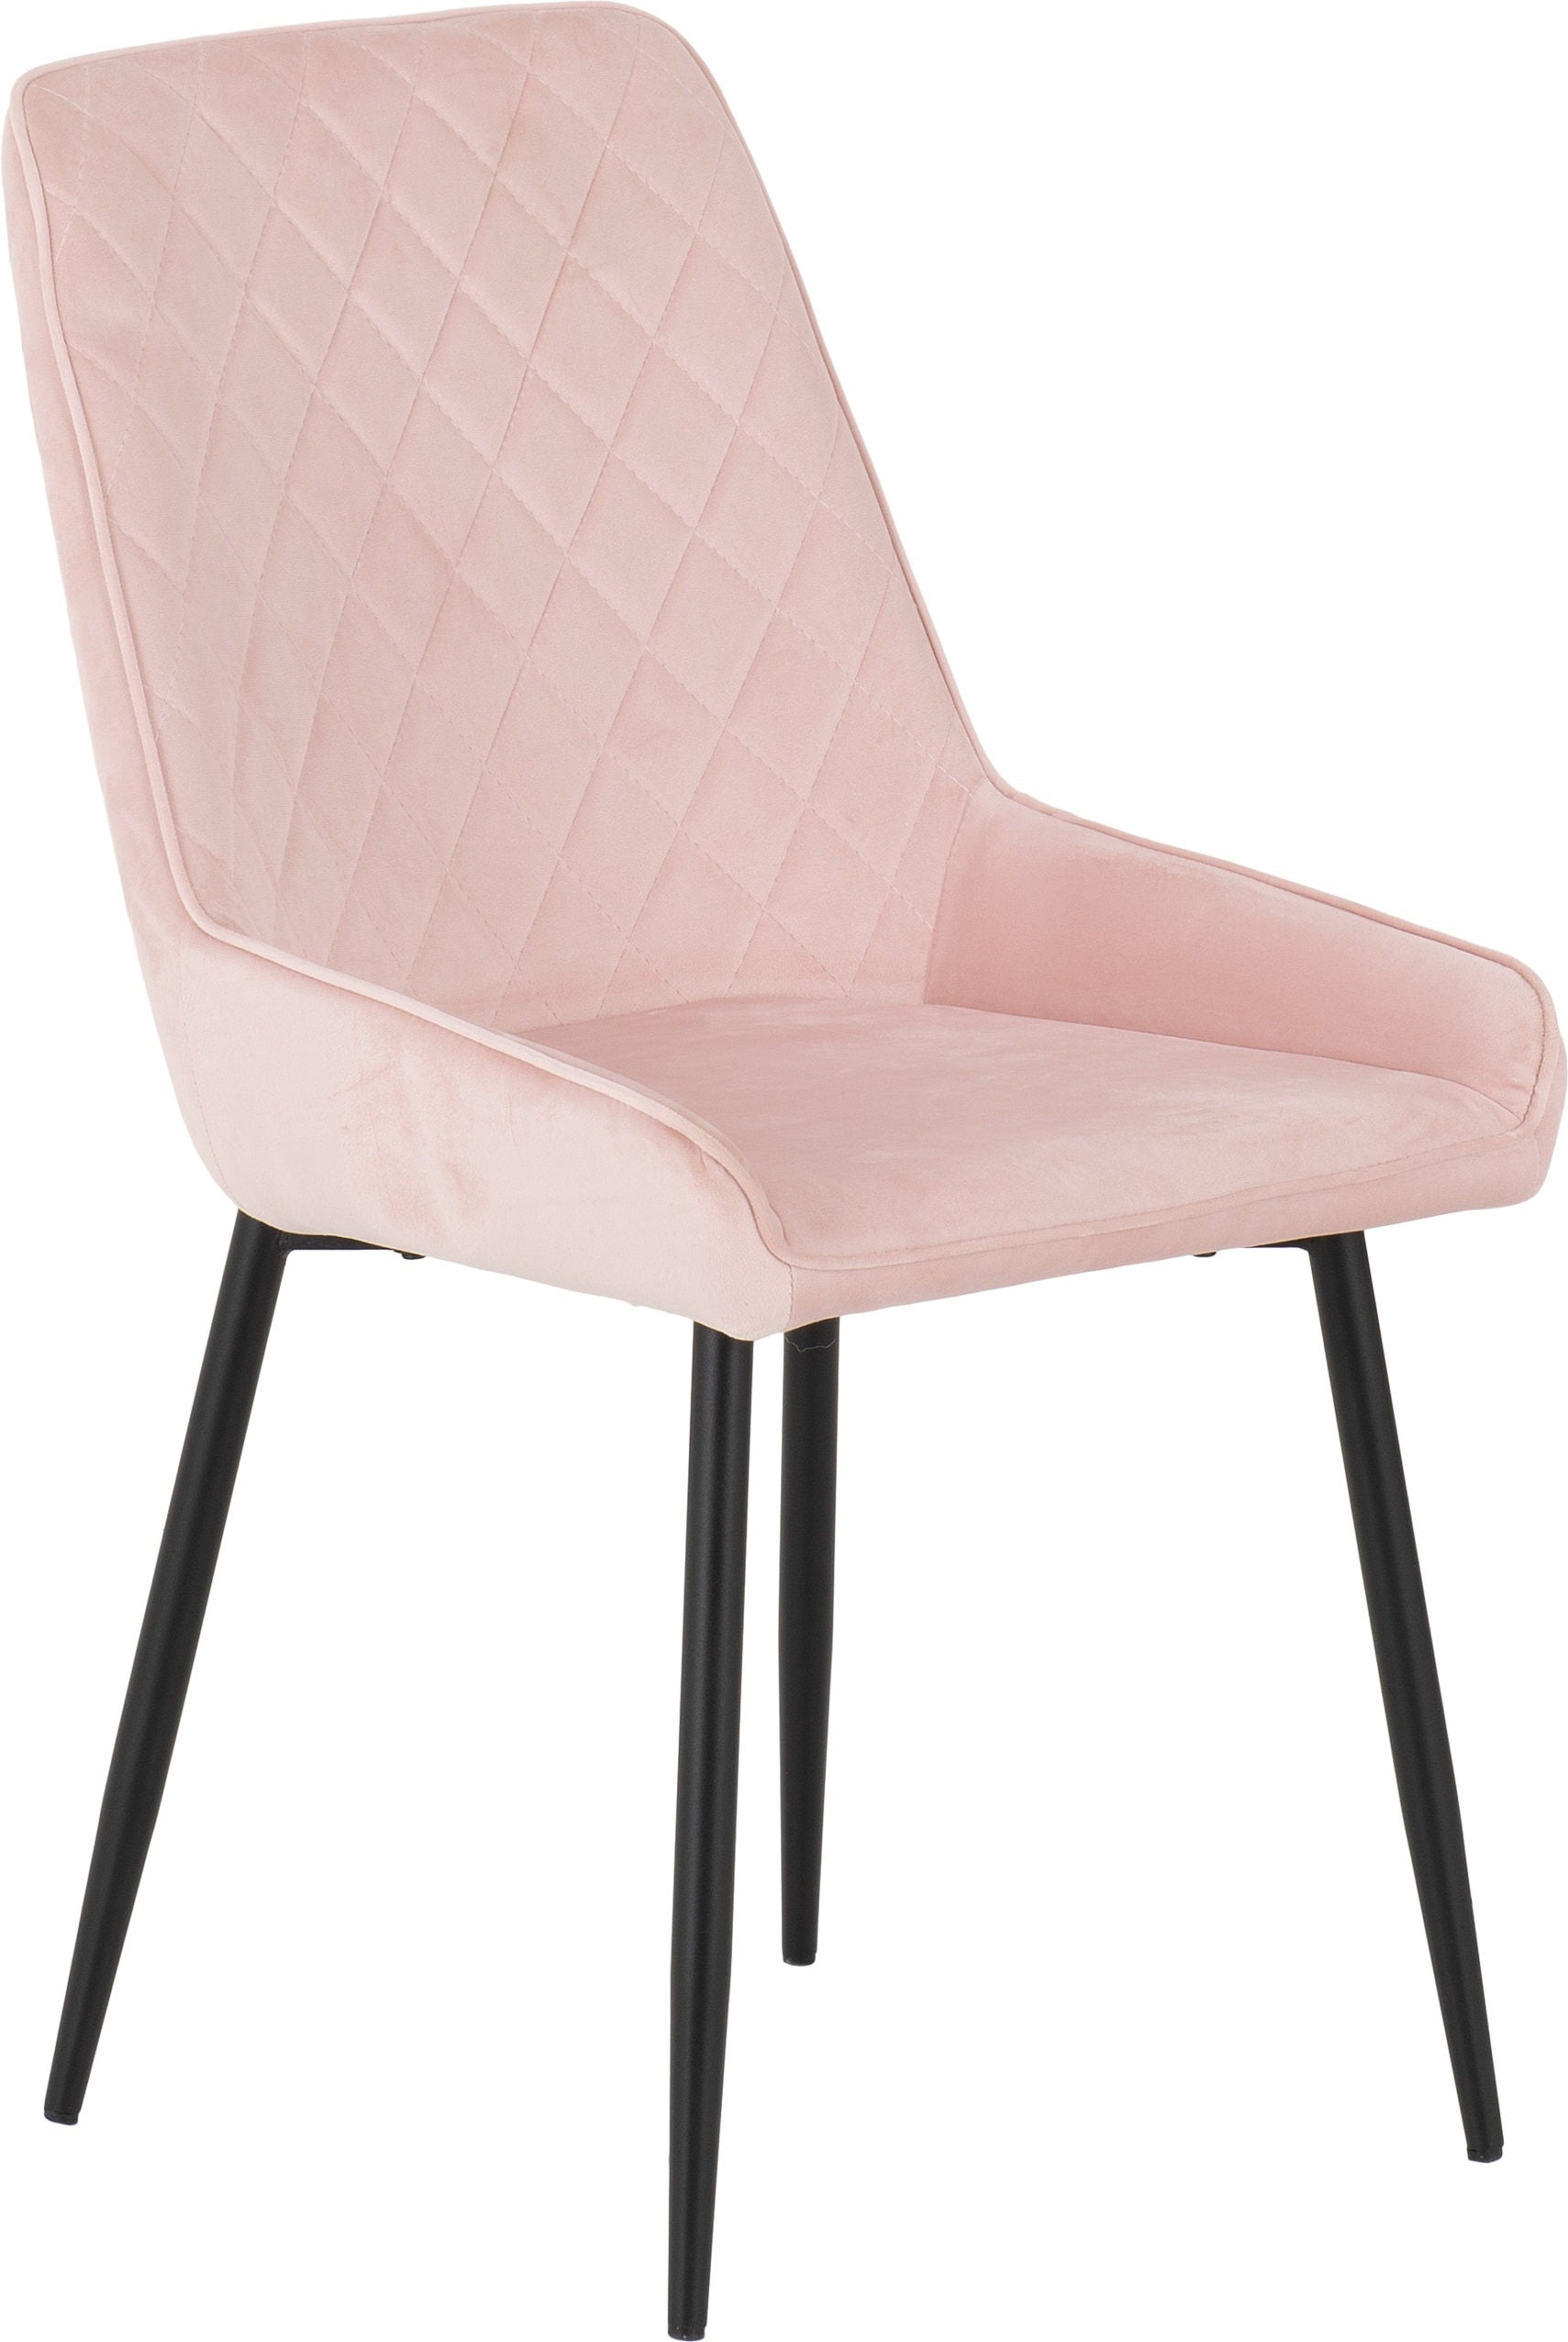 Avery Chairs Baby Pink Velvet - The Right Buy Store